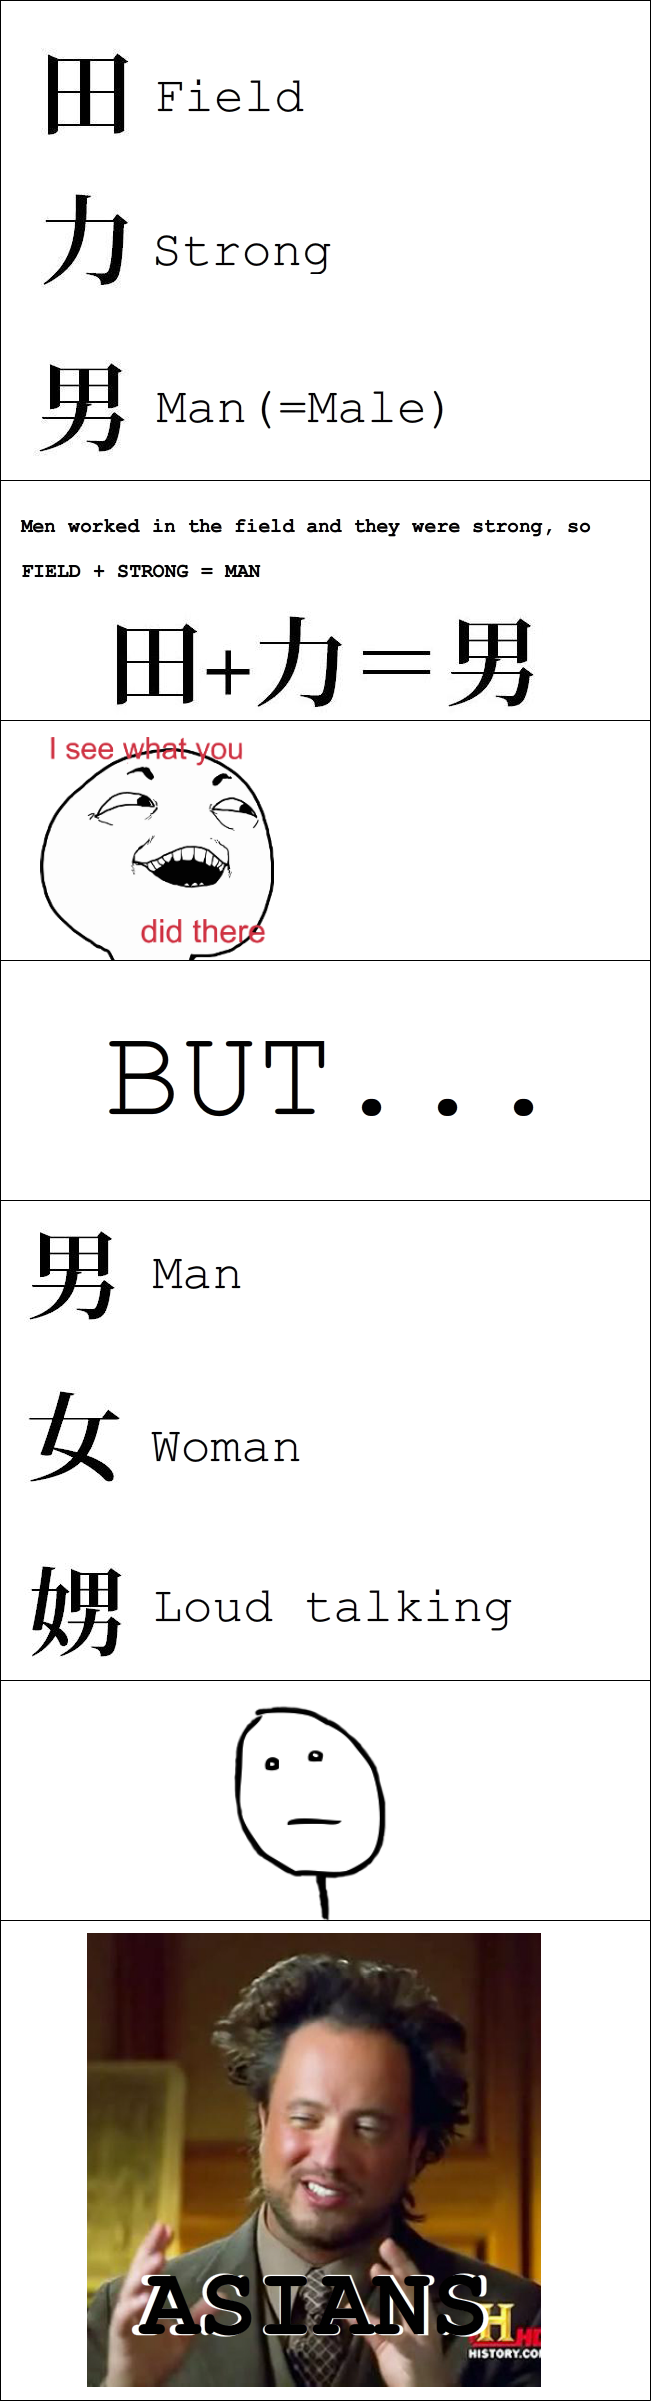 Asians Logic in the writing system